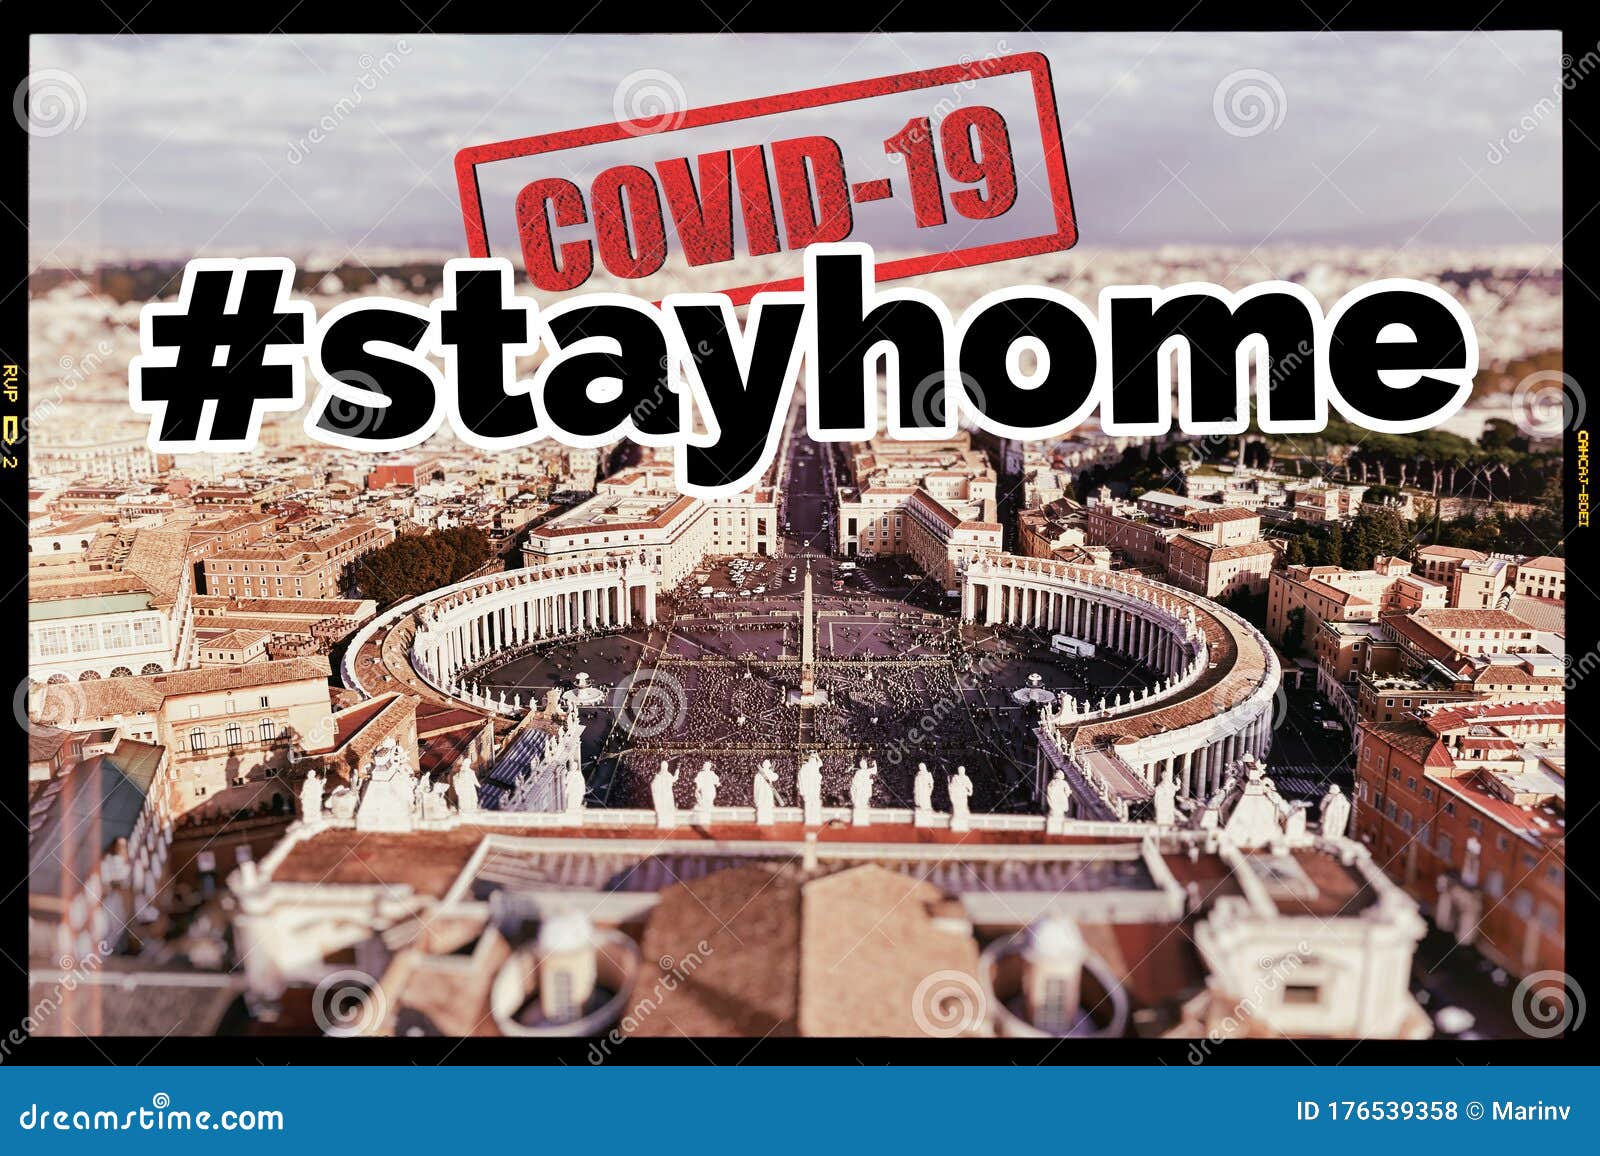 city of rome and st. peter`s square with sign  stayhome regarding covid-19 pandemic.